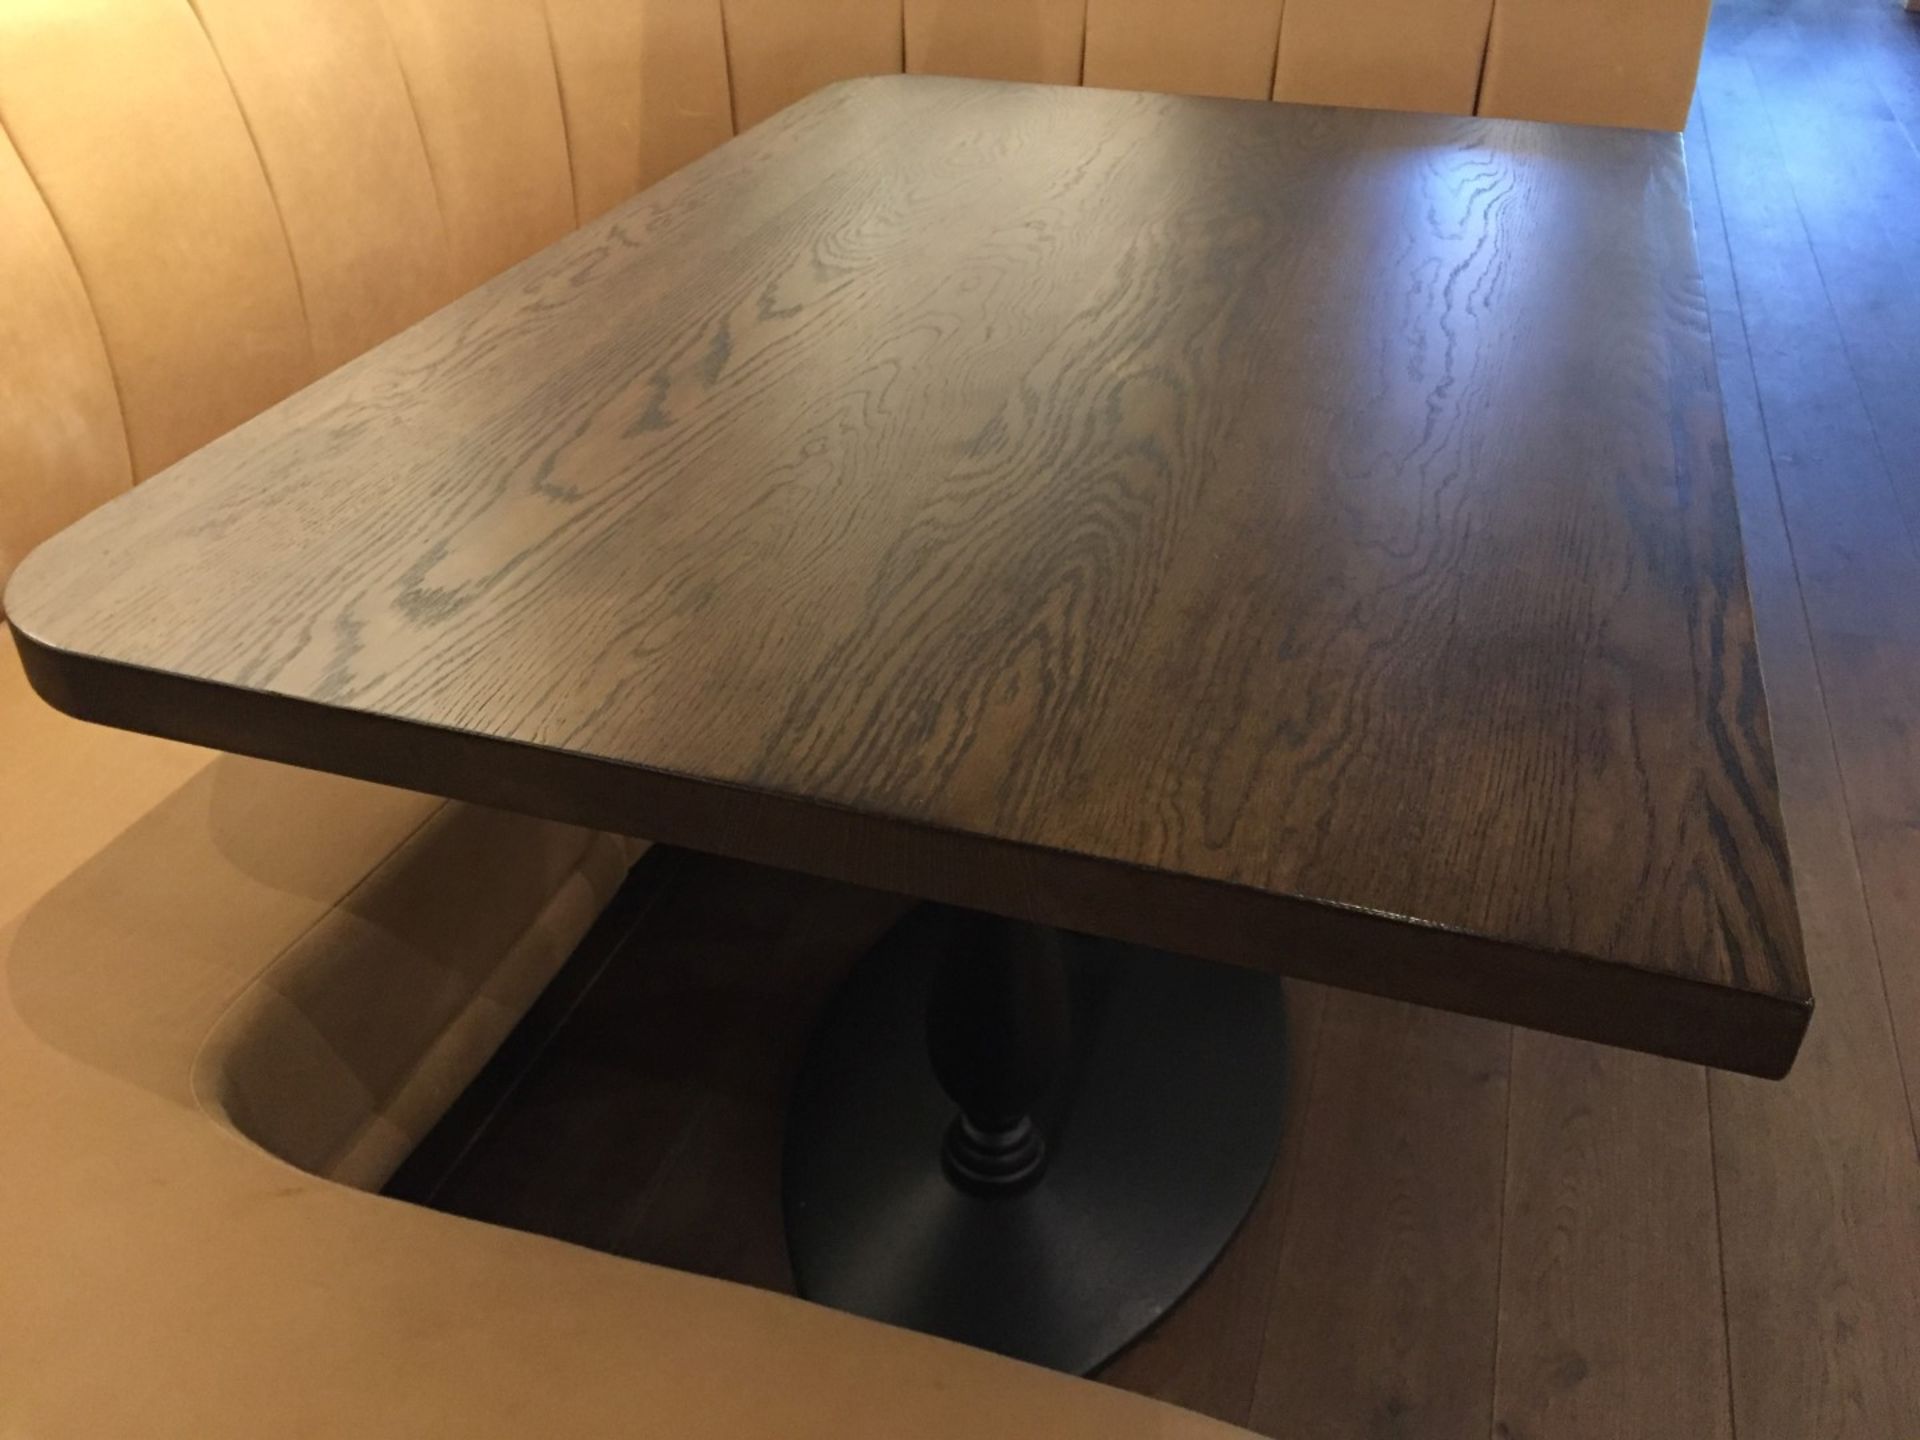 1 x Luxurious High End Shaped Restaurant Table - Features A Stunning Solid Wood Top With A - Image 6 of 10